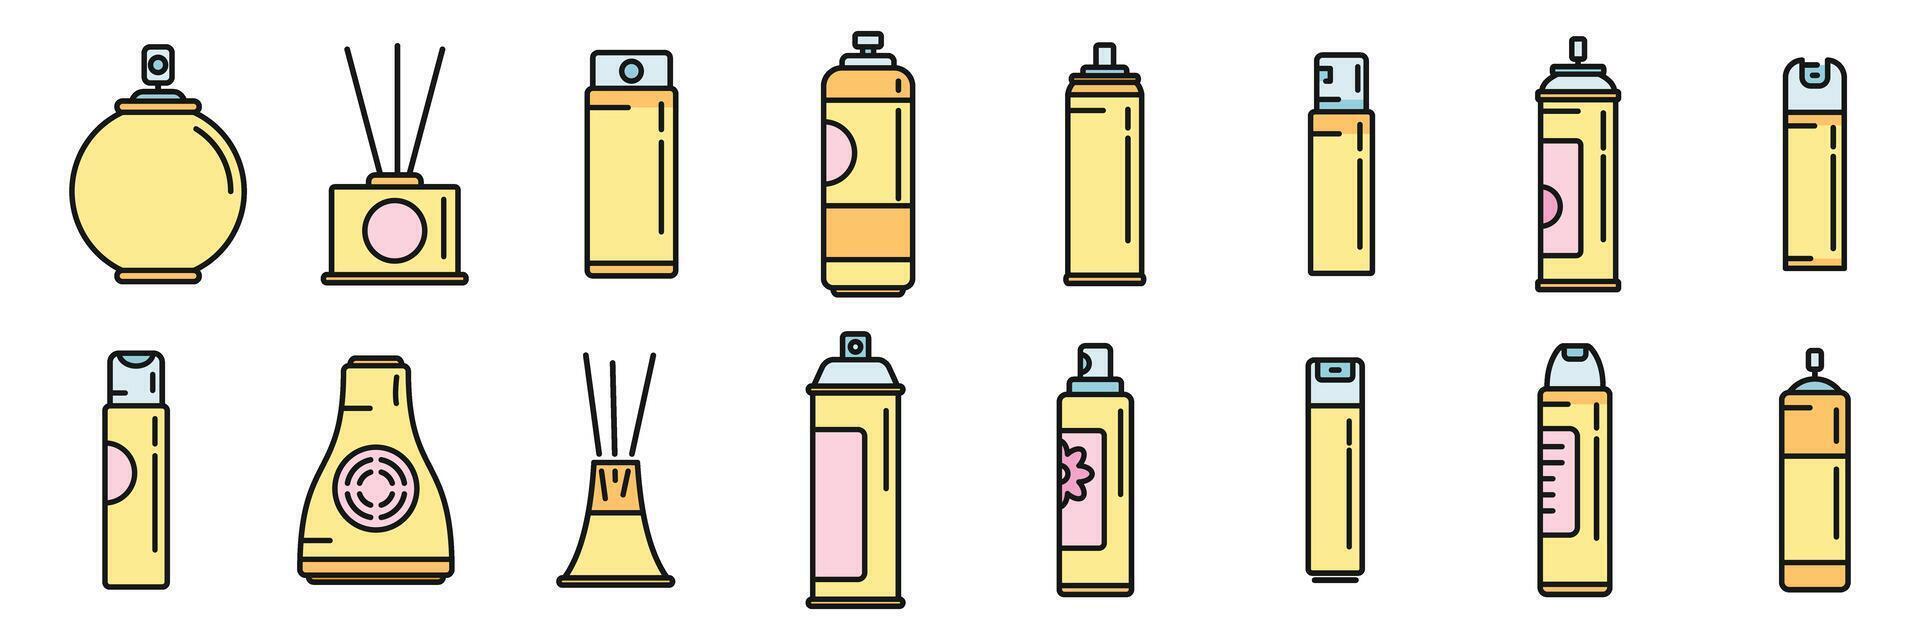 Air freshener icons set vector color line